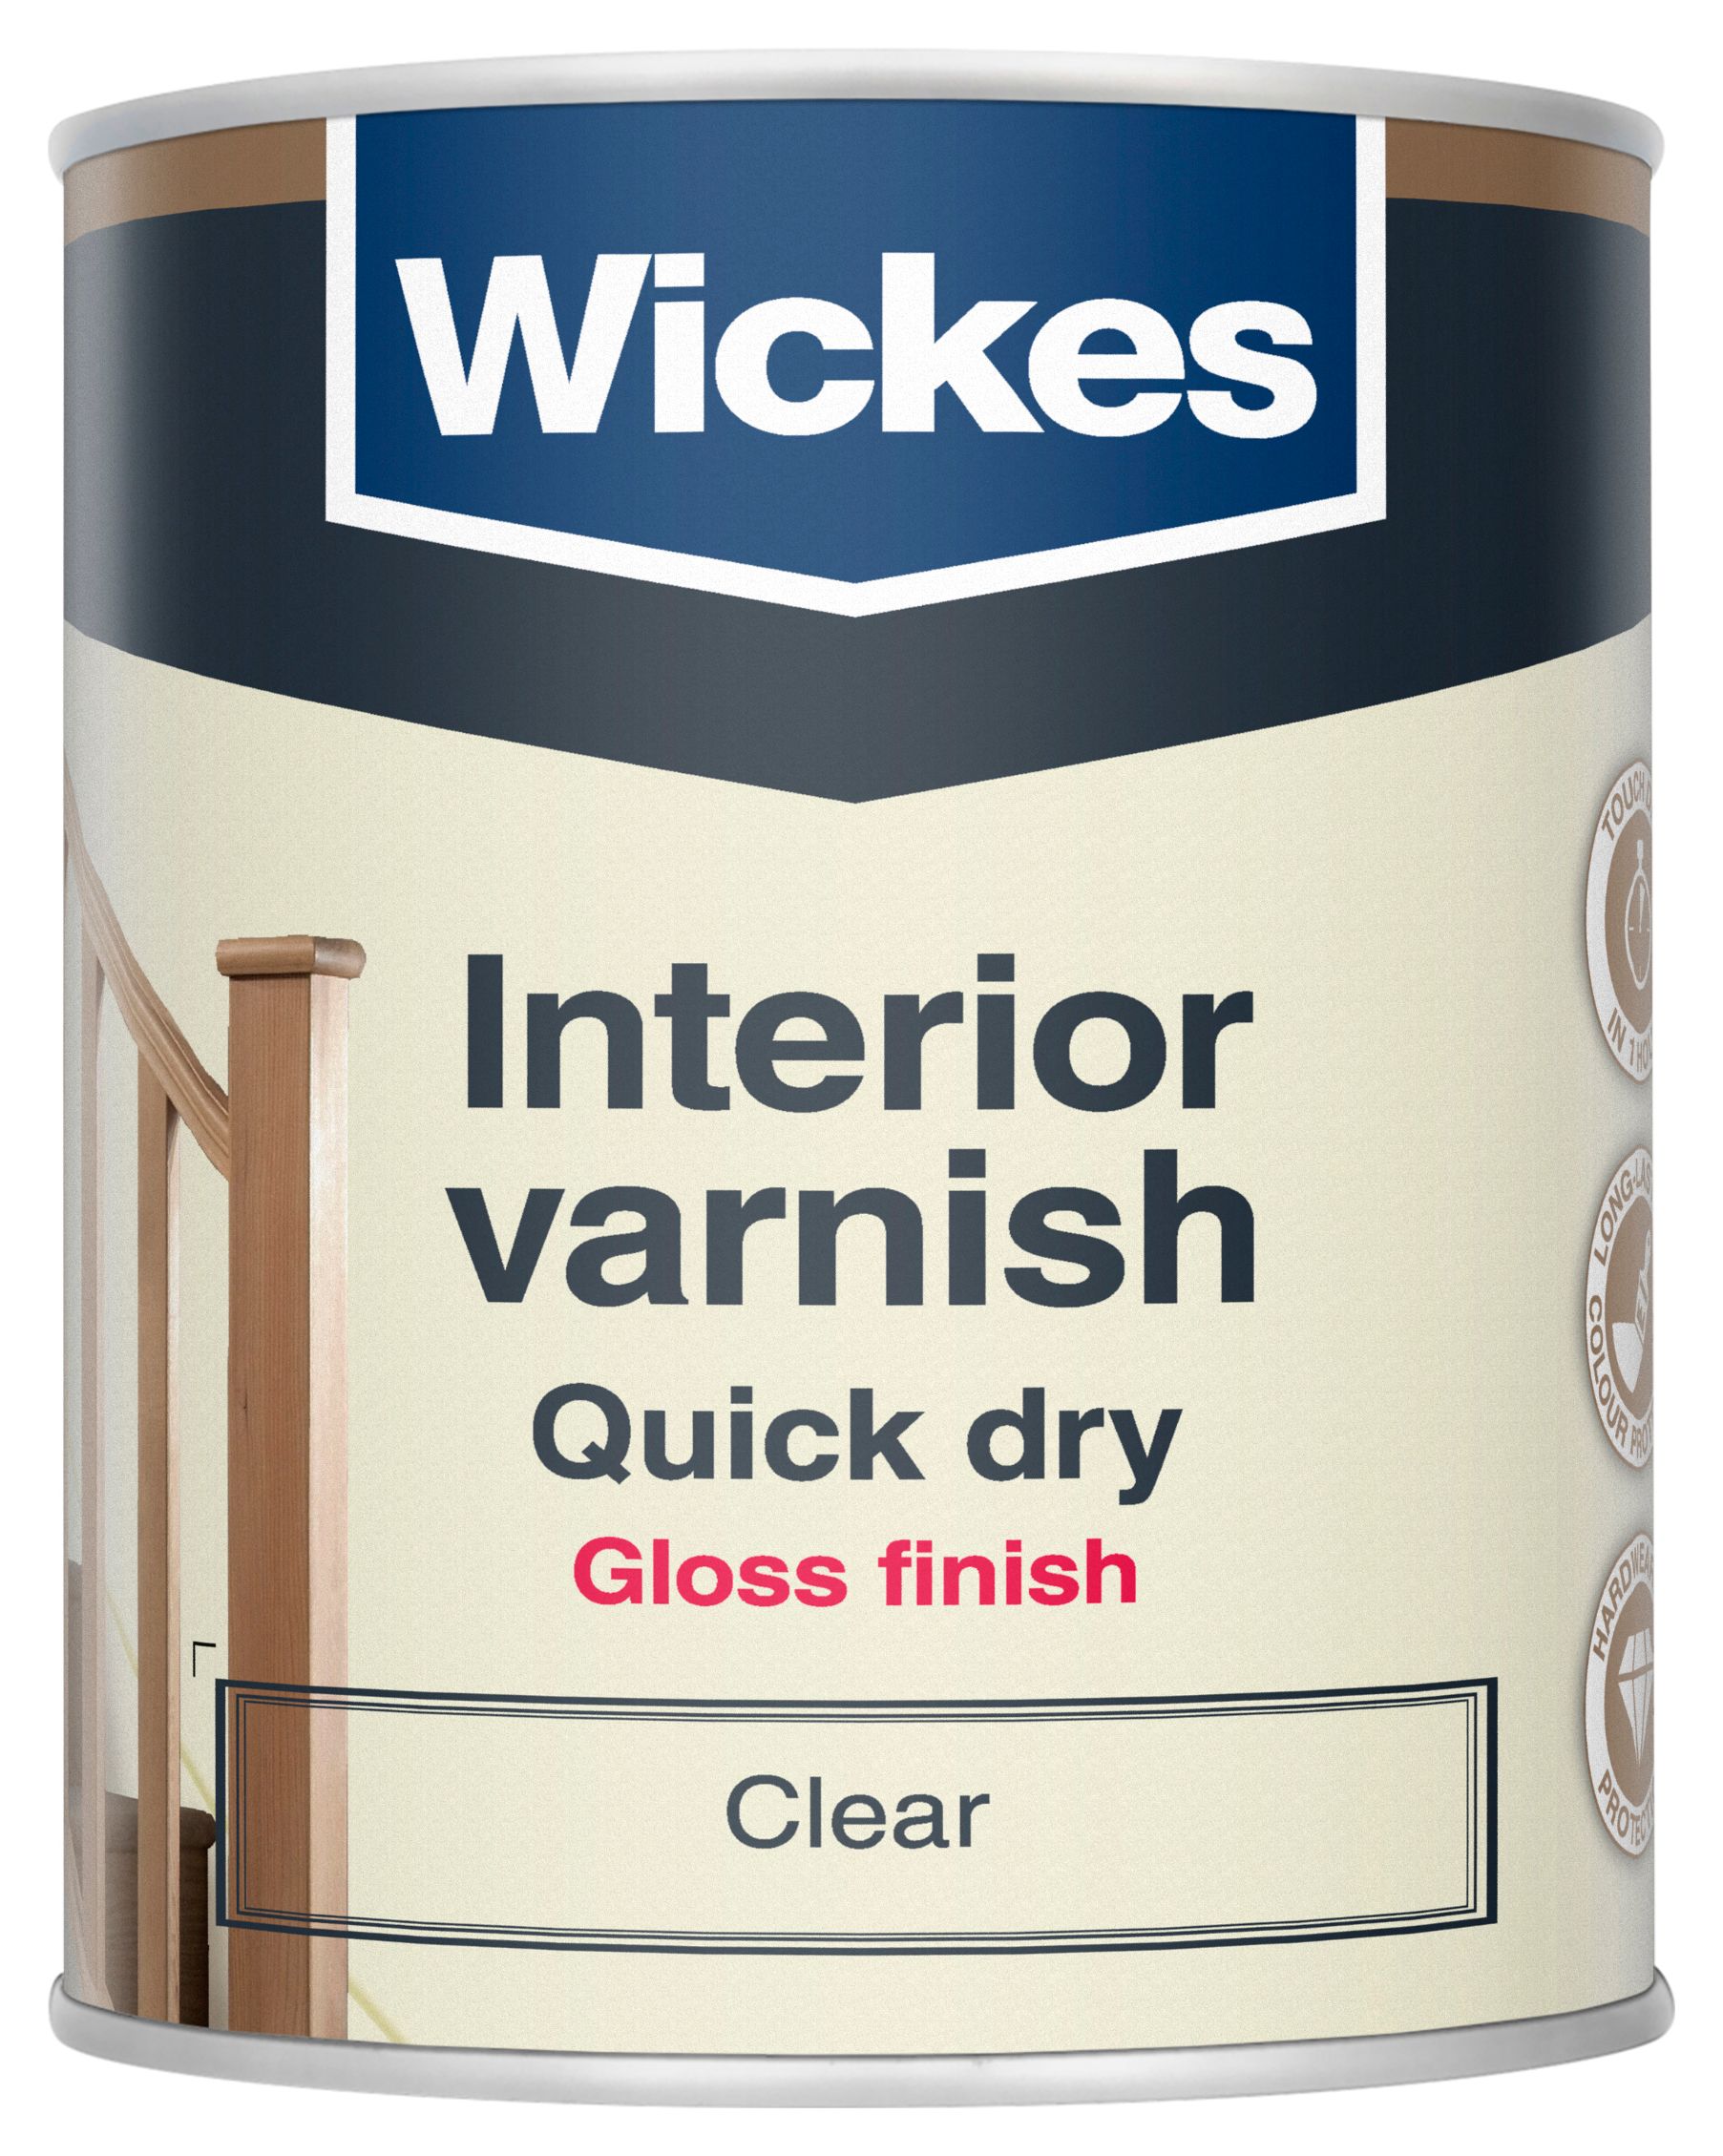 Wickes Quick Dry Interior Varnish - Clear Gloss